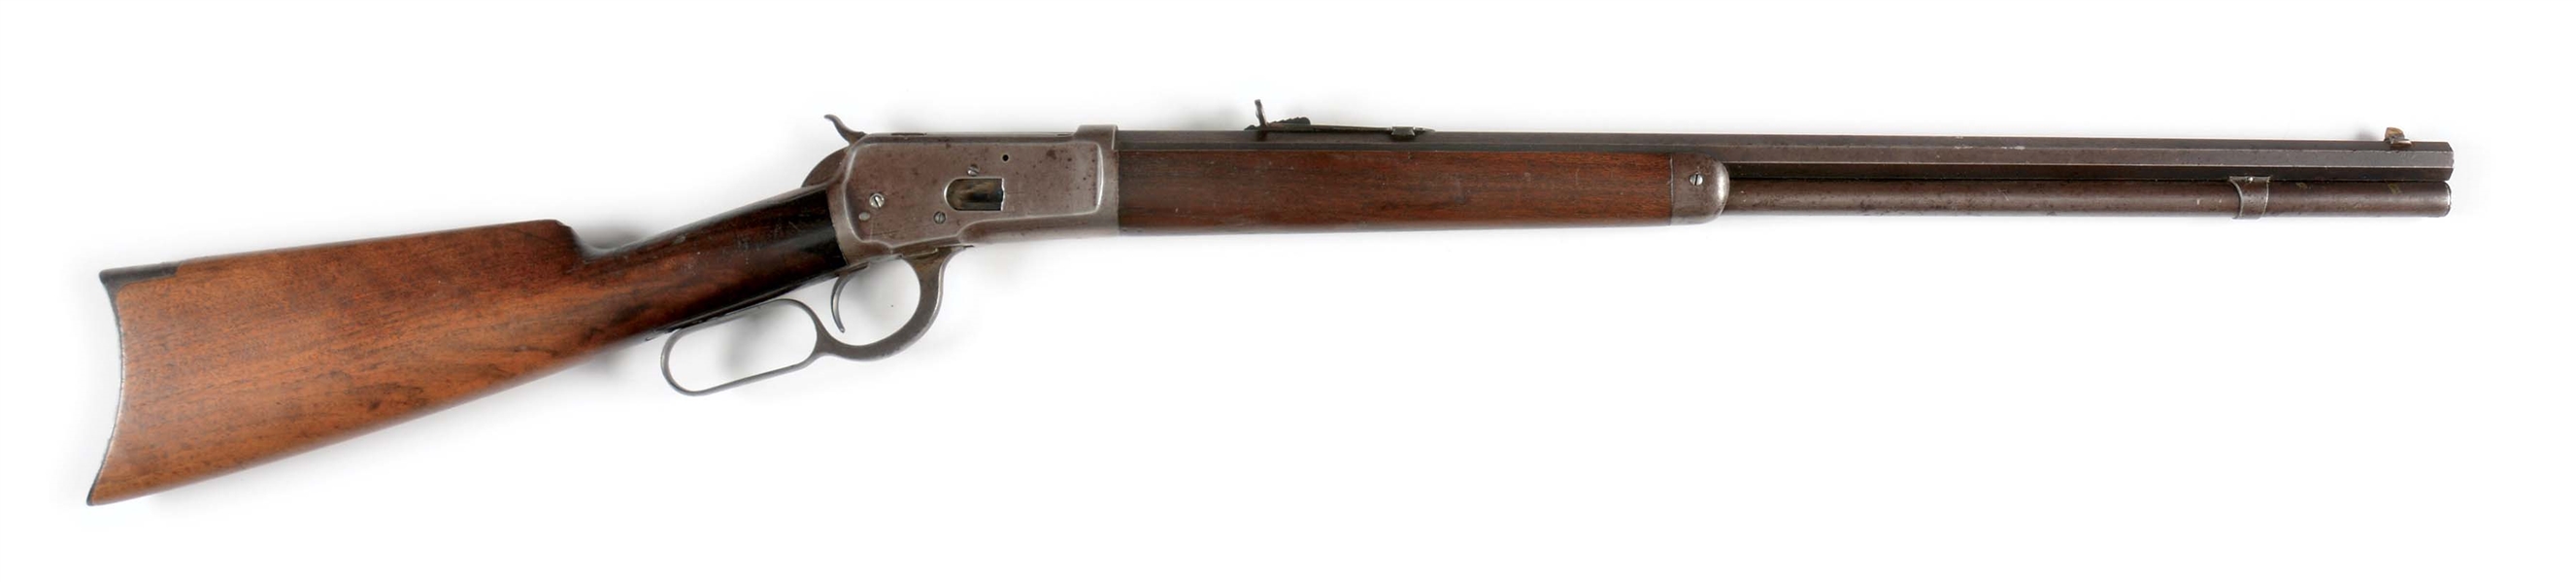 (A) 1ST YEAR OF PRODUCTION WINCHESTER MODEL 1892 LEVER ACTION RIFLE.